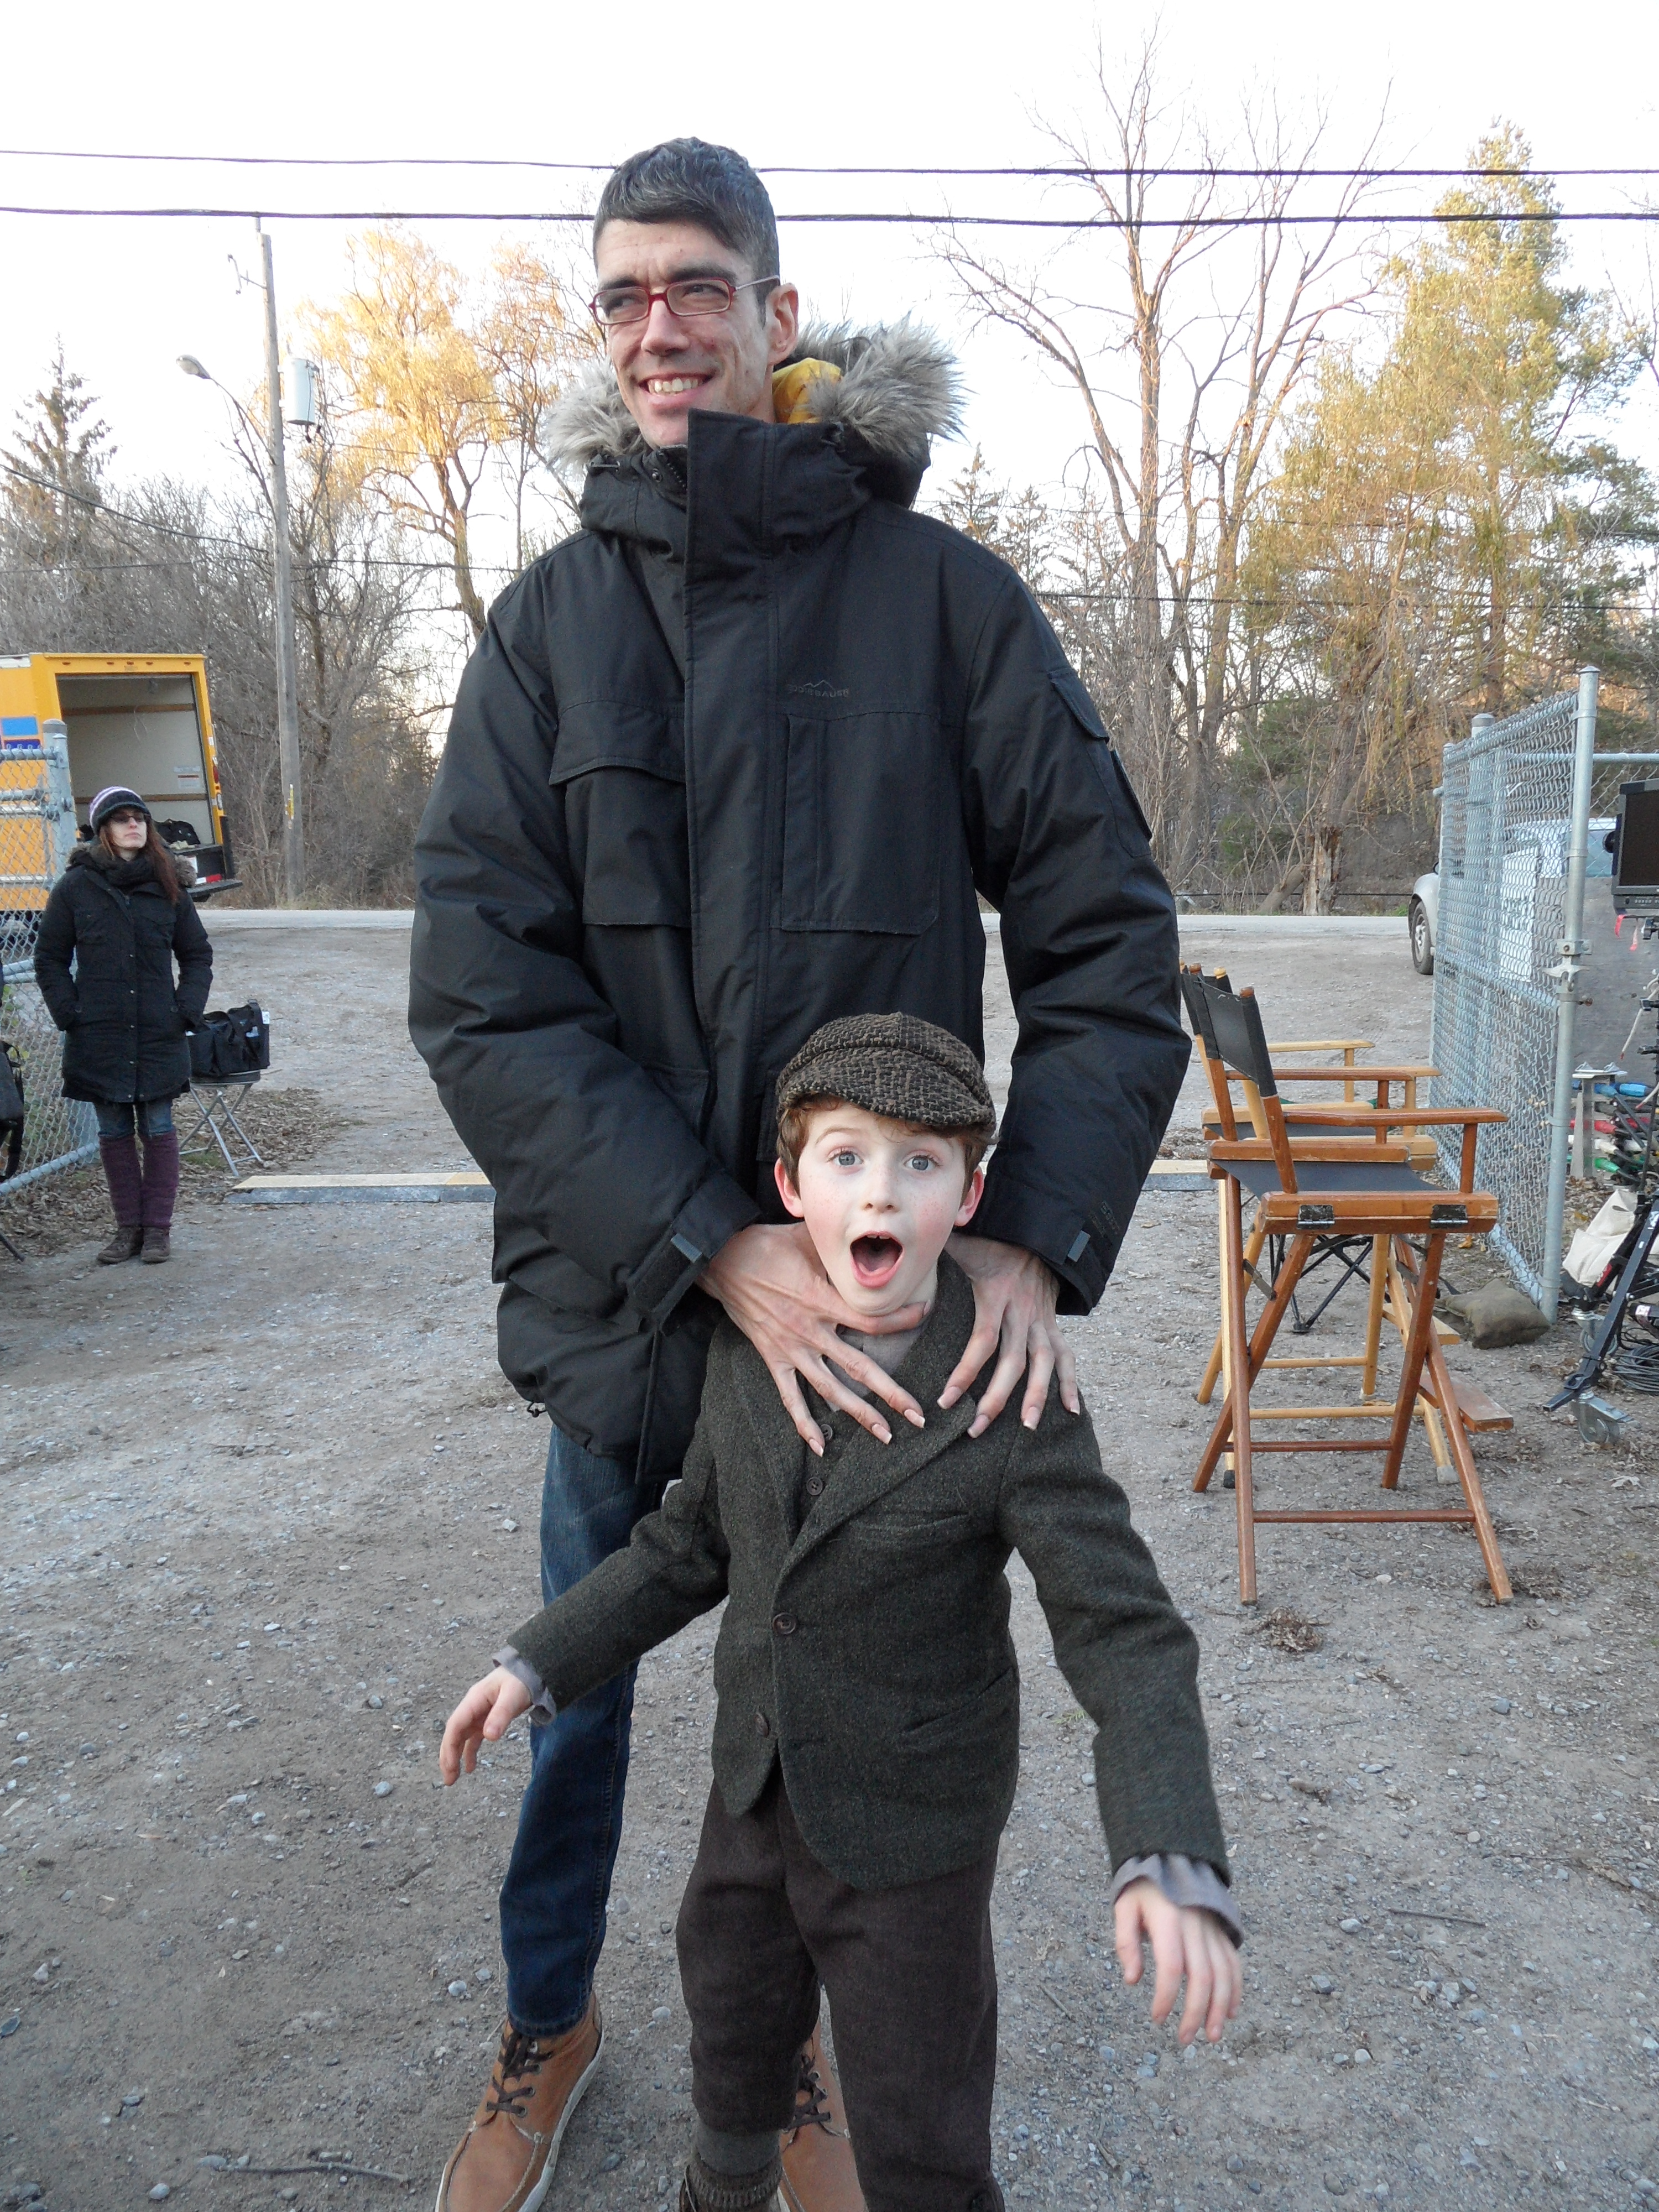 Mama (feature film November 2011) - on set with Javier Botet who played 